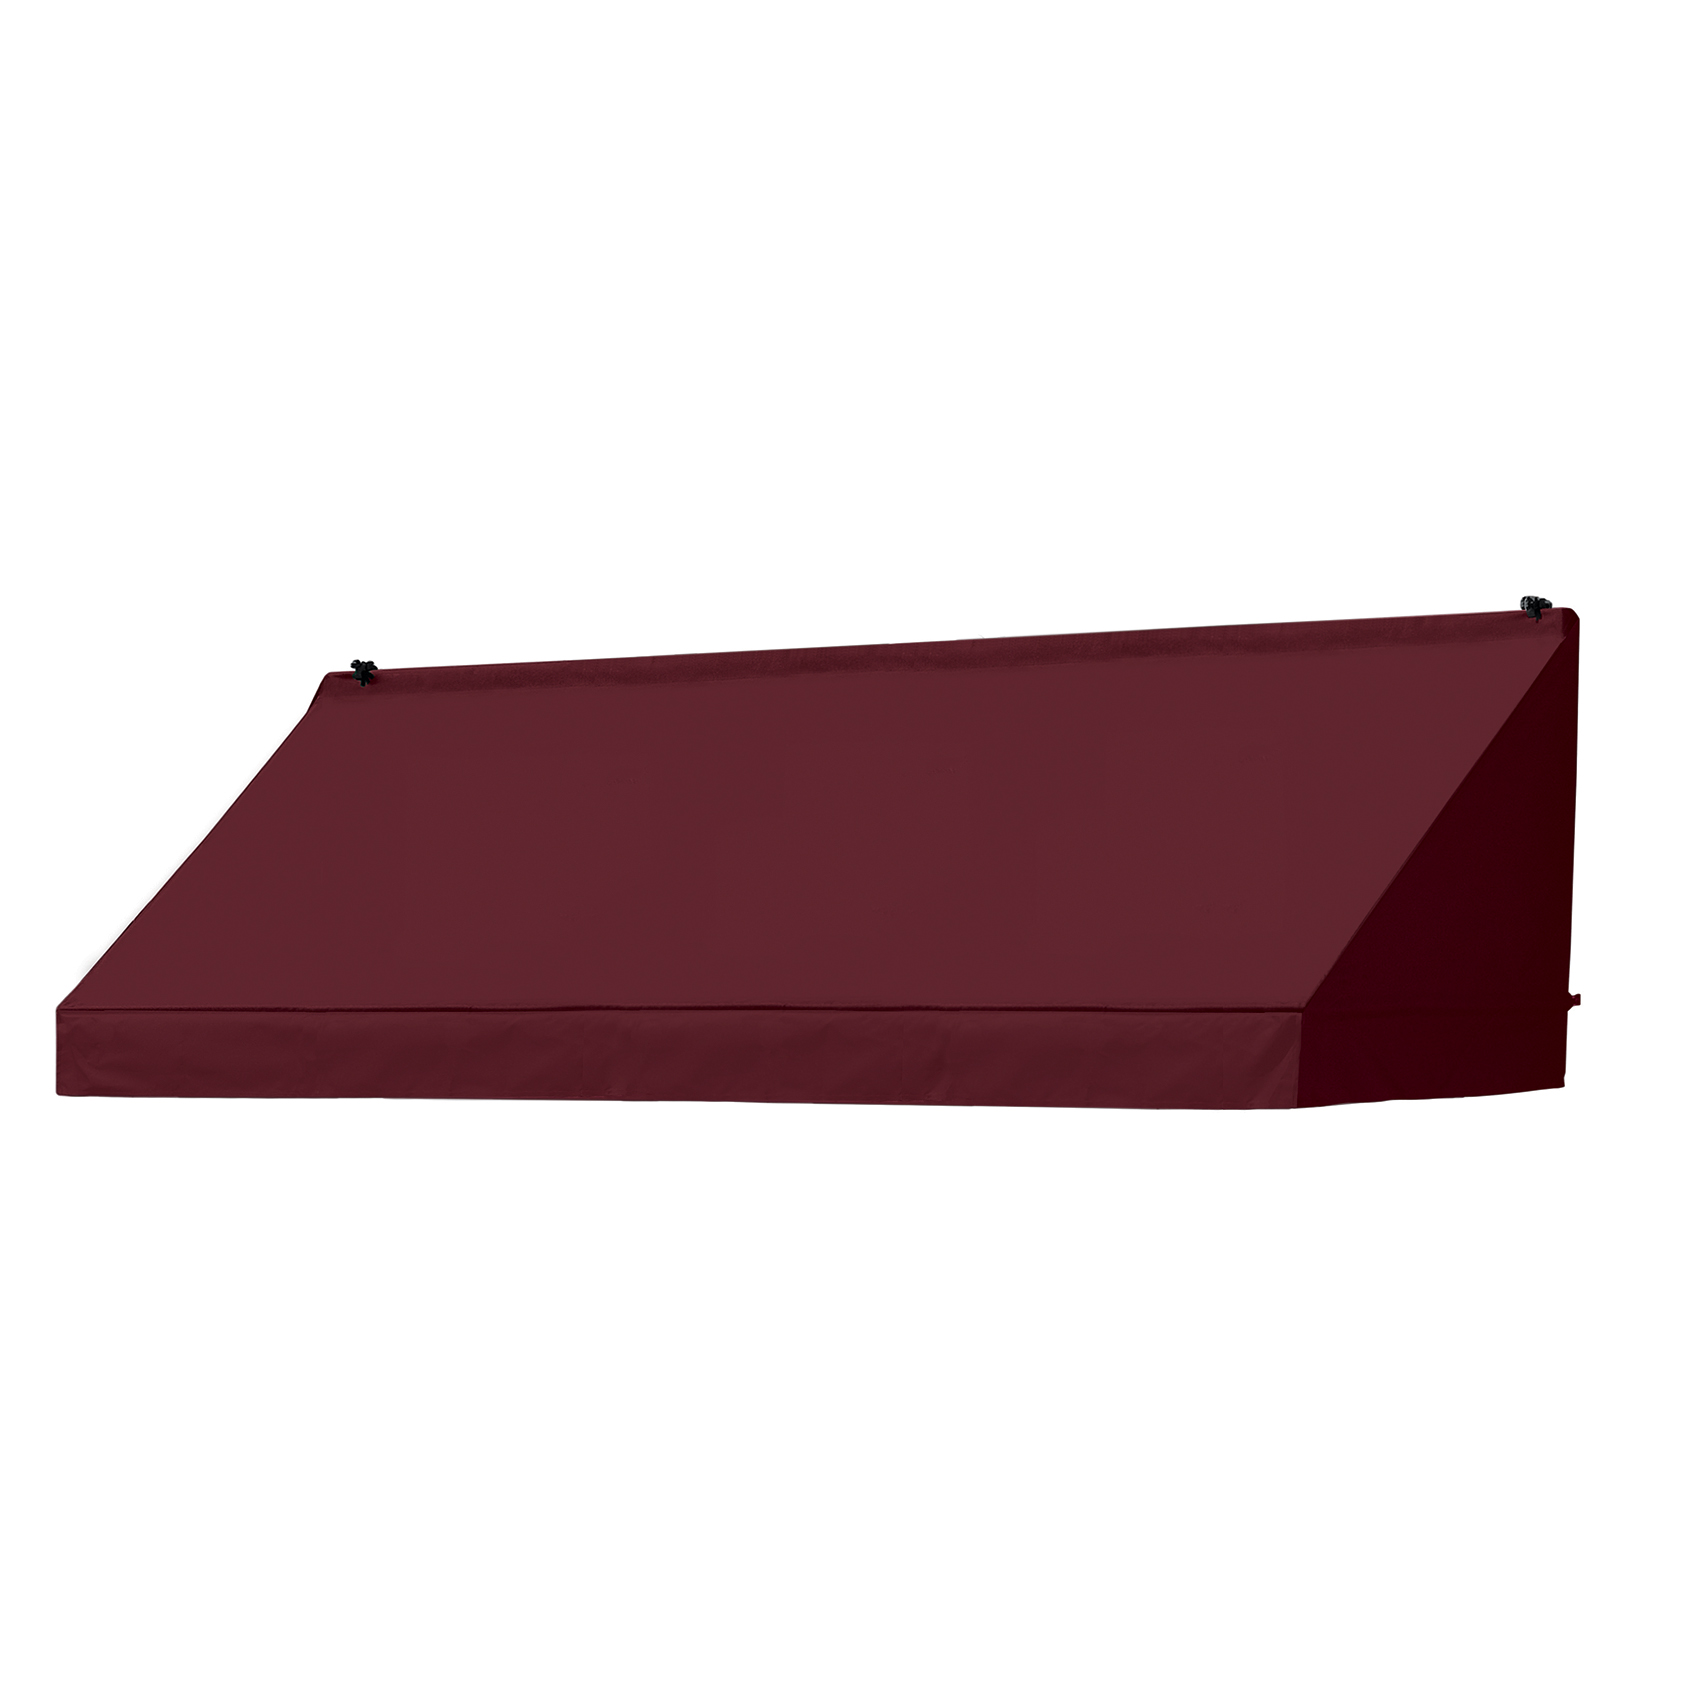 Awnings in a Box&reg; 6' Classic Style Awning in Assorted Colors